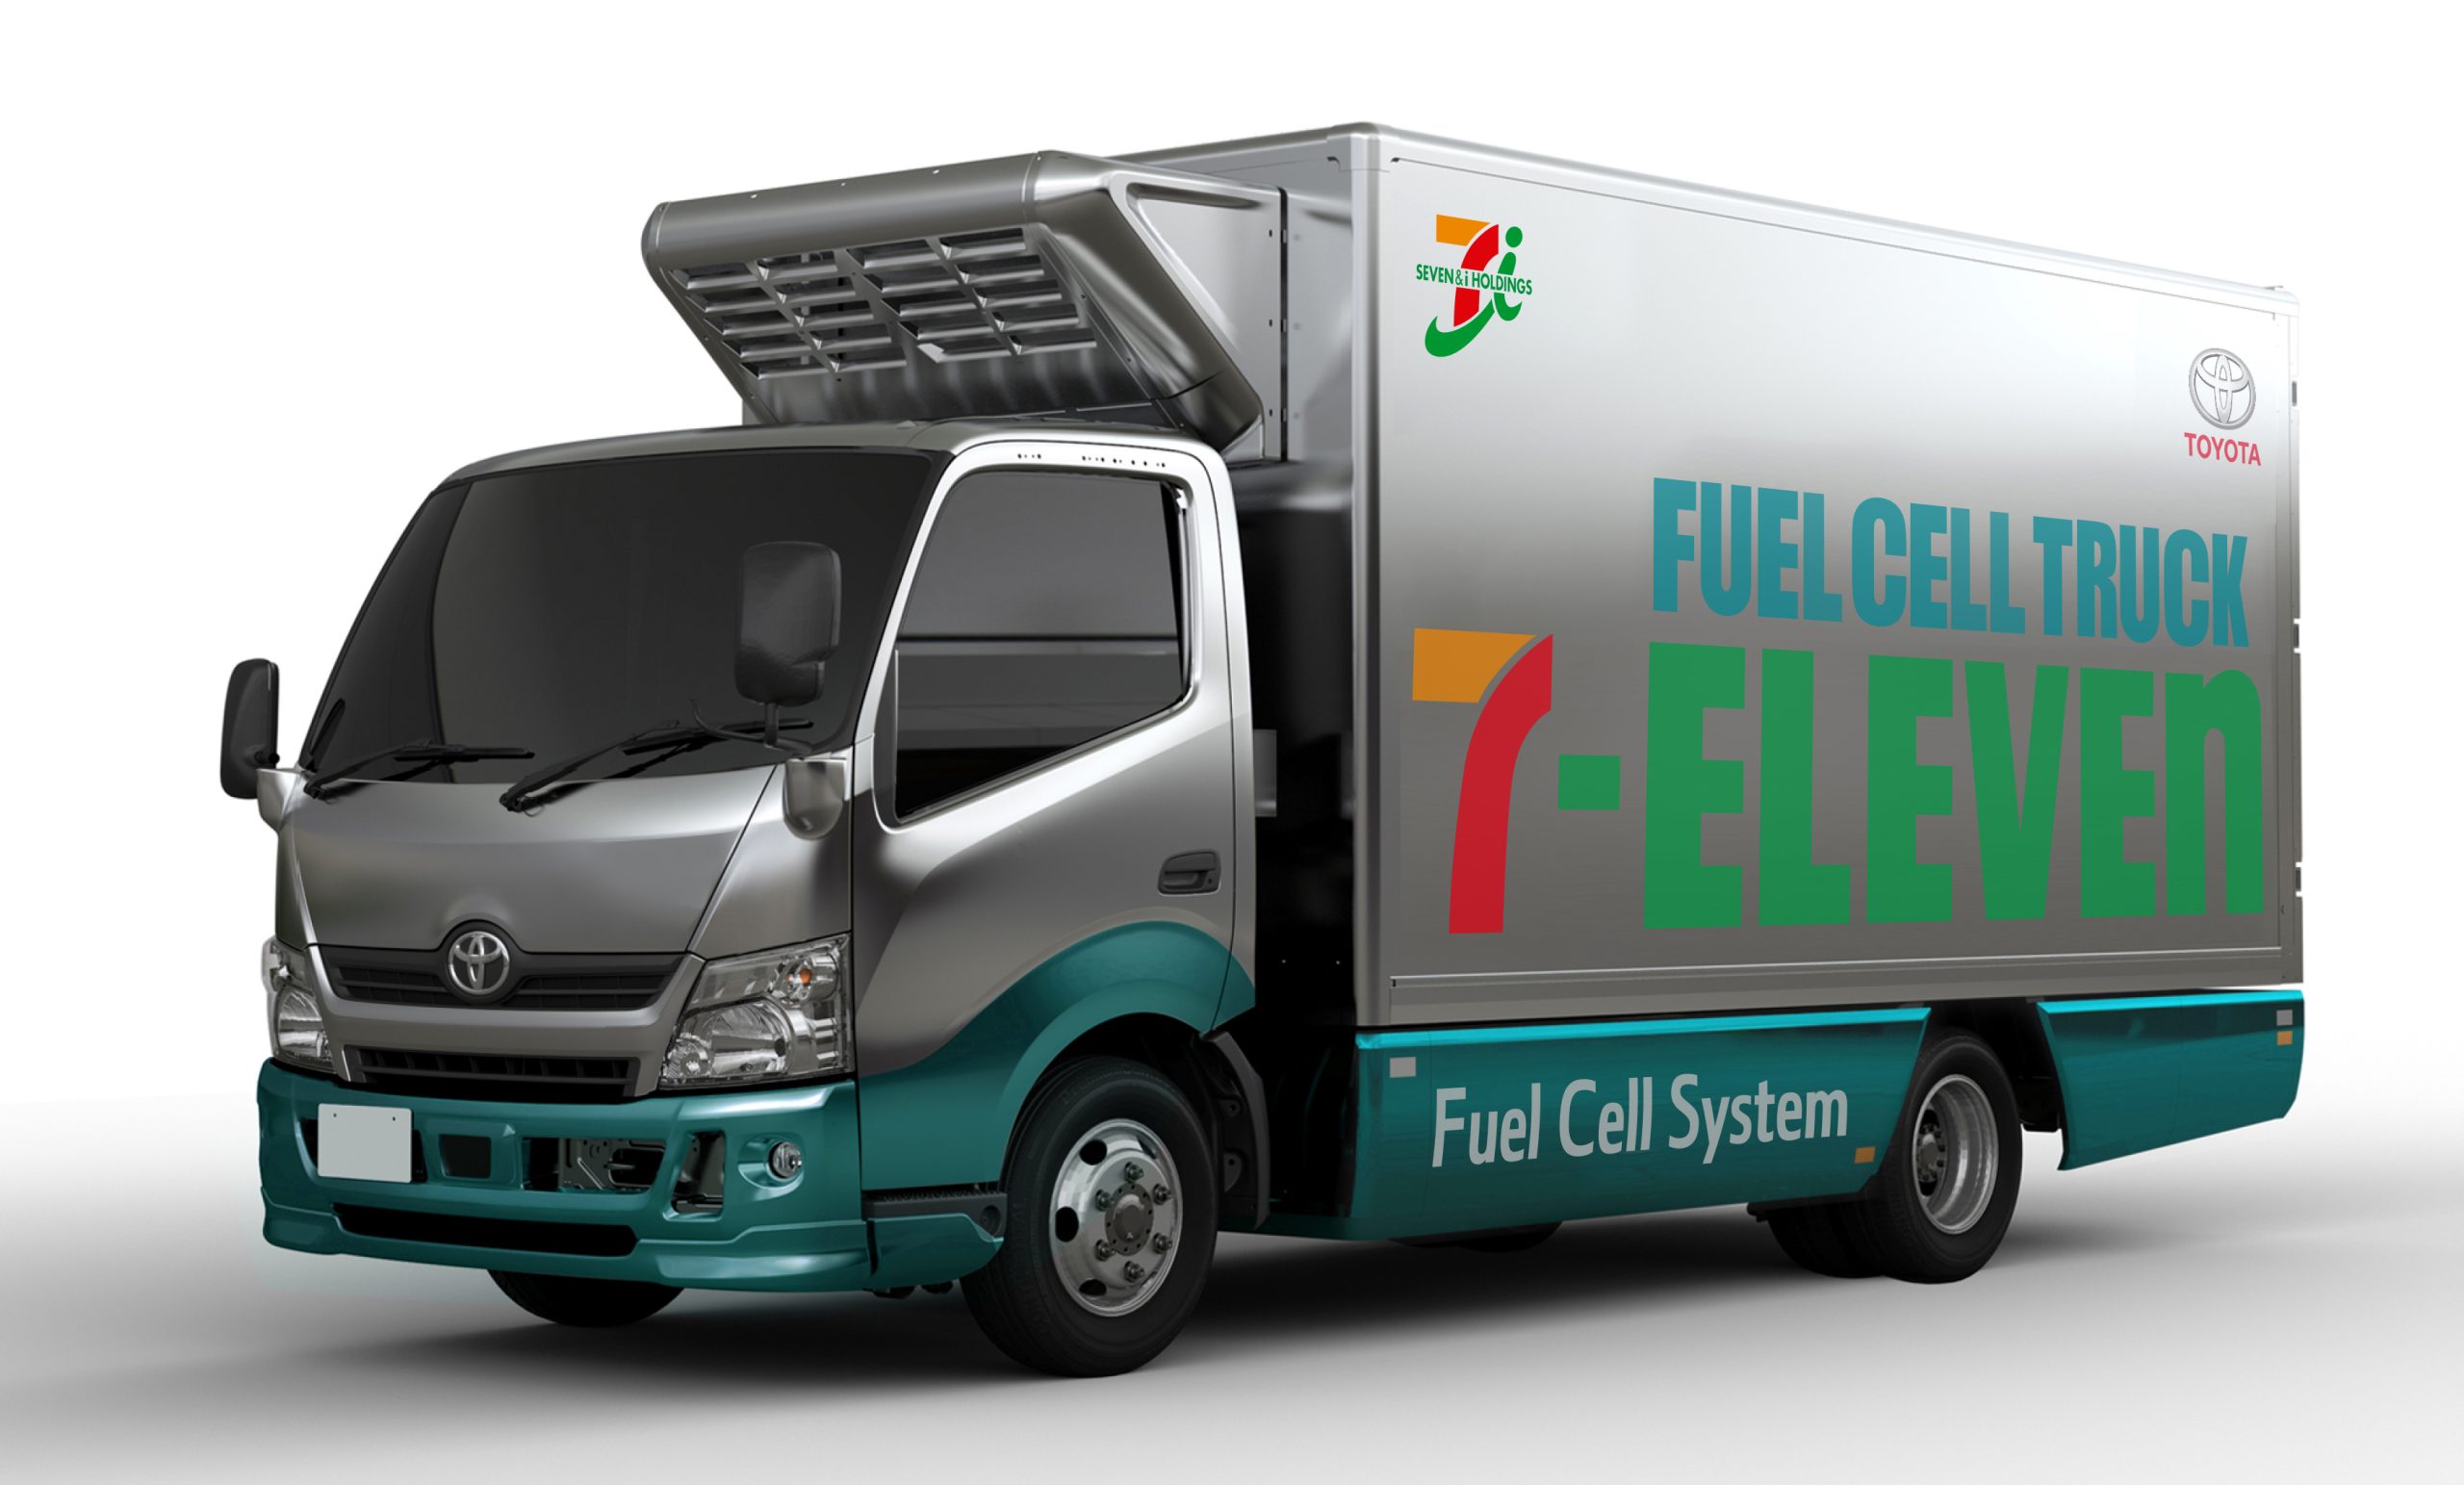 Toyota, Hino, Isuzu, DENSO and CJPT starting with Planning and Foundational Research for Hydrogen Engines for Heavy-Duty Commercial Vehicles